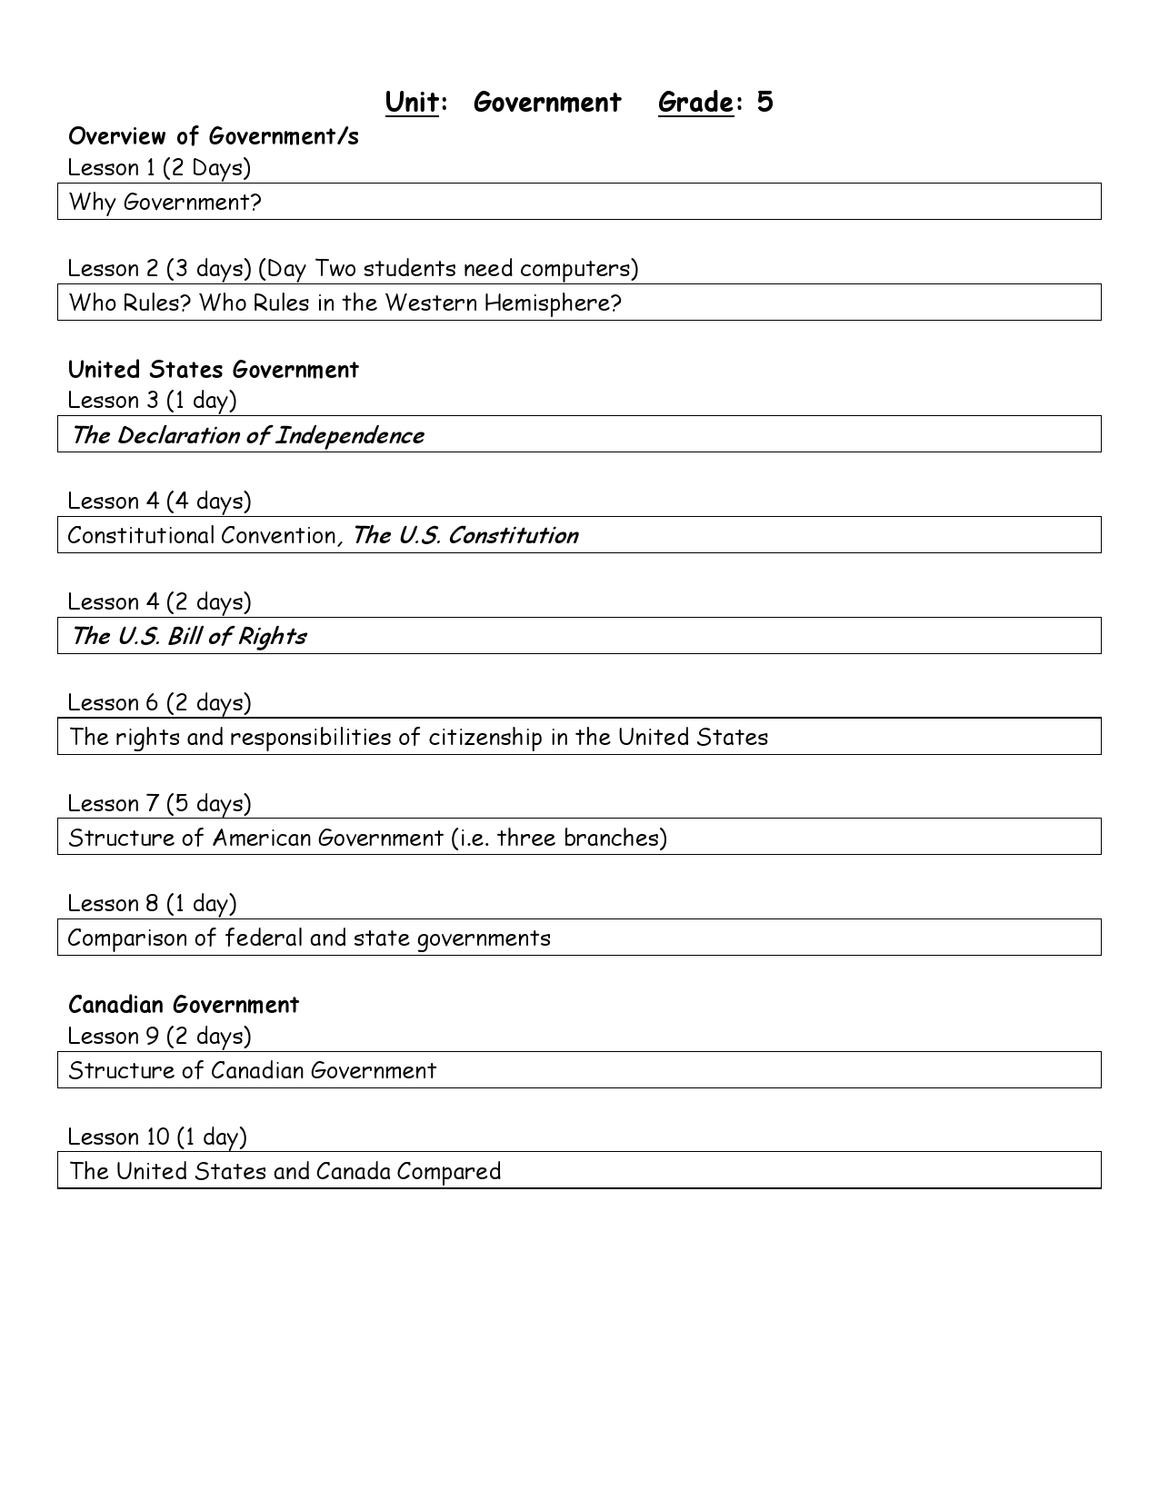 Forms Of Government Worksheet Grade 5 Government Unit by Half Hollow Hills Schools issuu